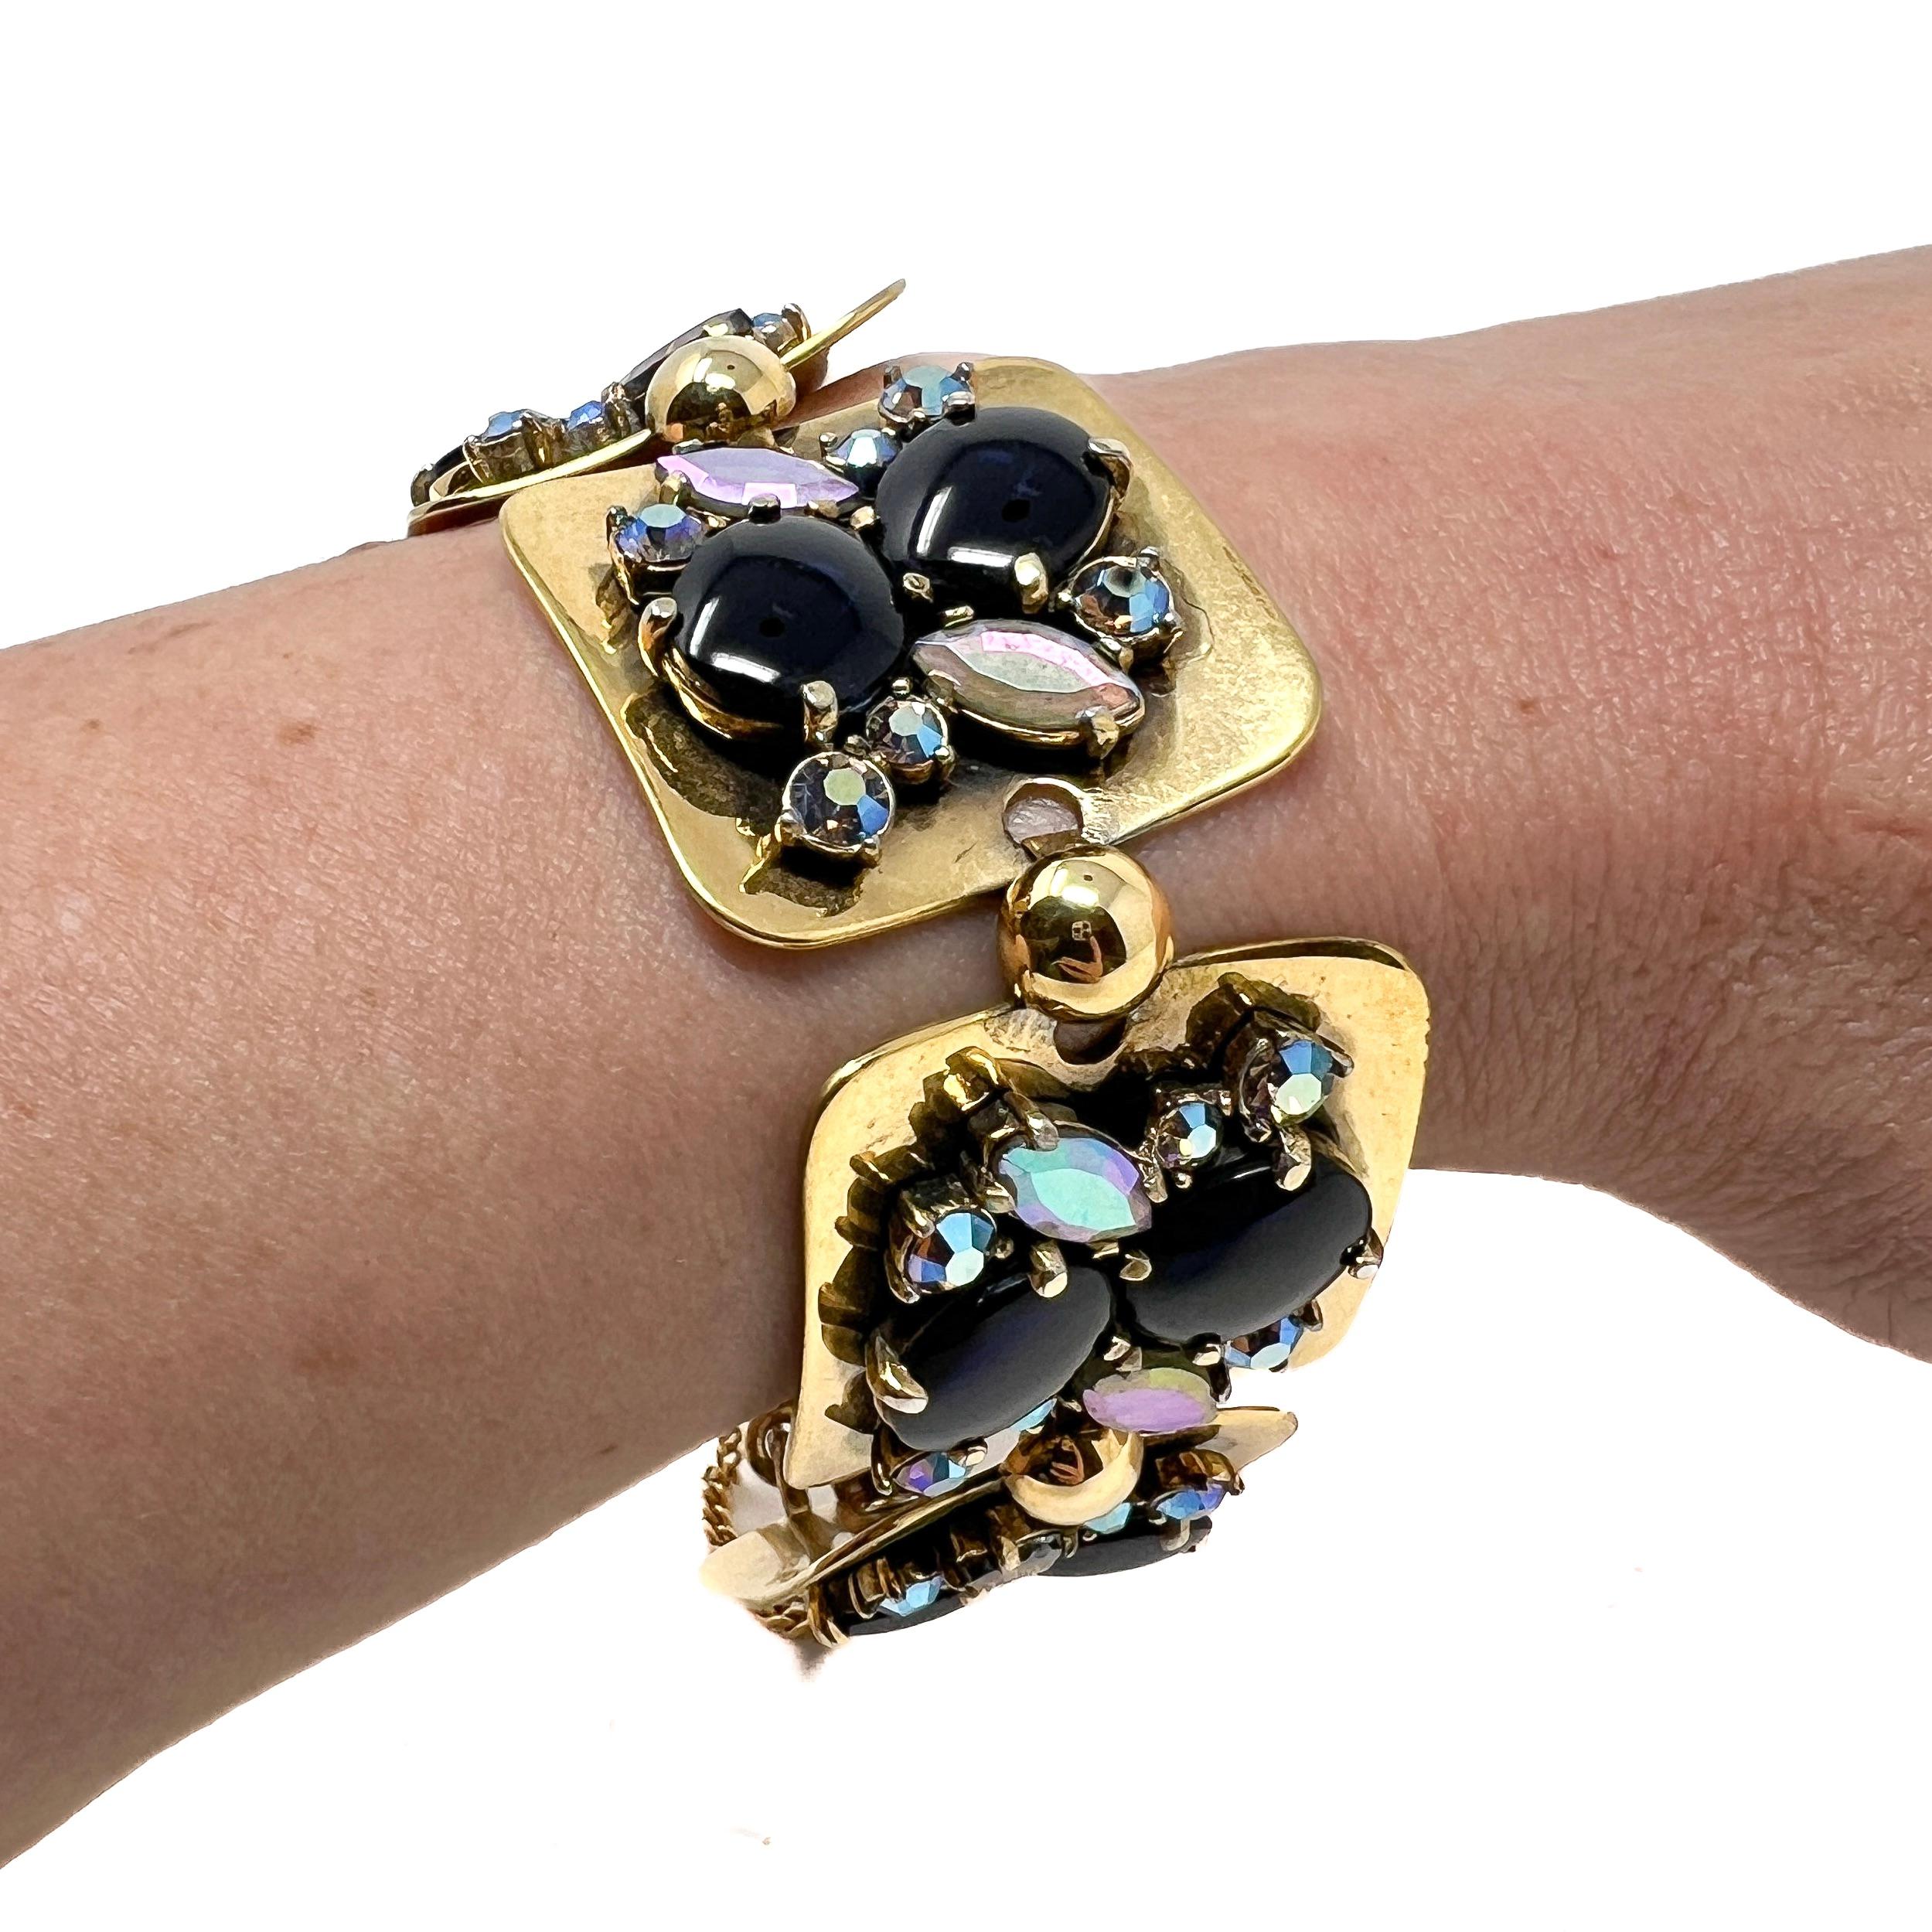 A beautiful bracelet by a much sought after maker of costume jewellery. This piece dates from the late 1950s and was created by Schiaparelli.

Condition Report:
Excellent

The Details...
This gold plated bracelet features 5 square panels. Each panel